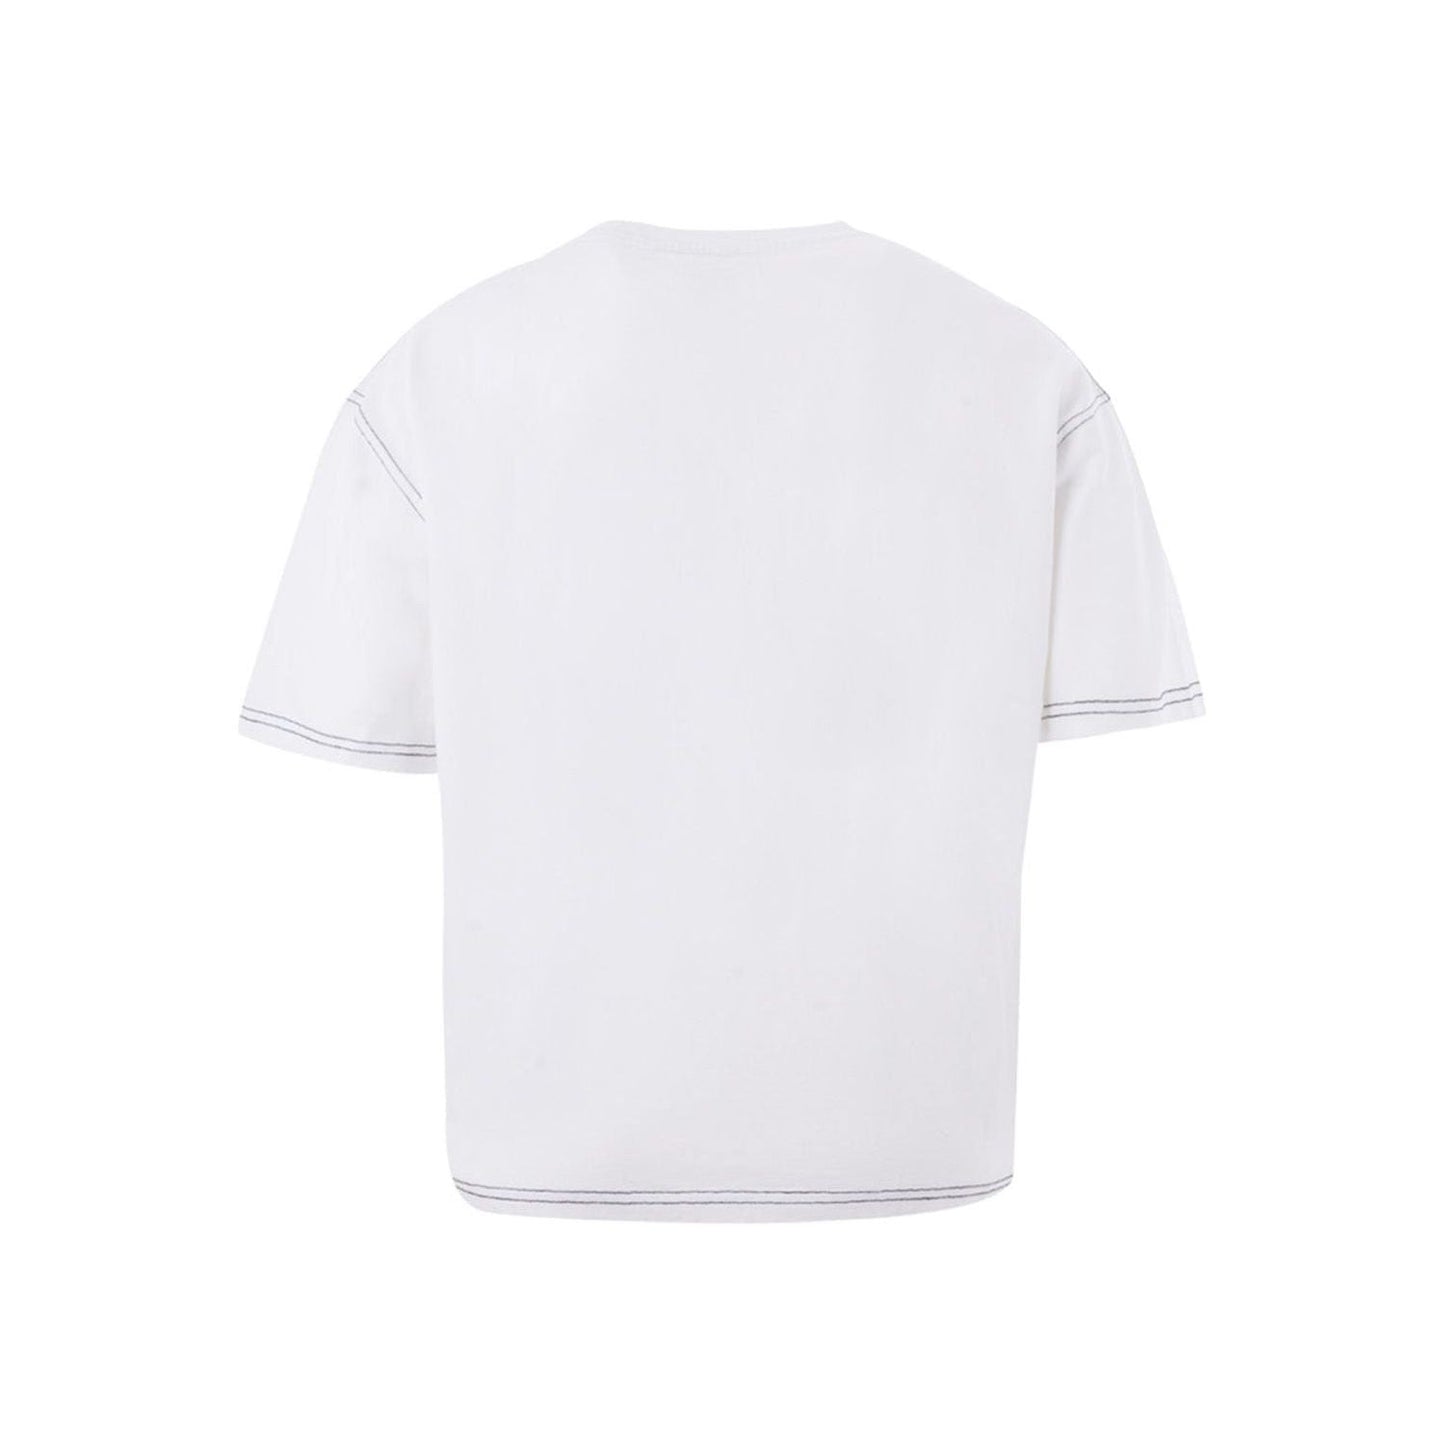 Kenzo | White Cotton T-Shirt with Front Print  | McRichard Designer Brands